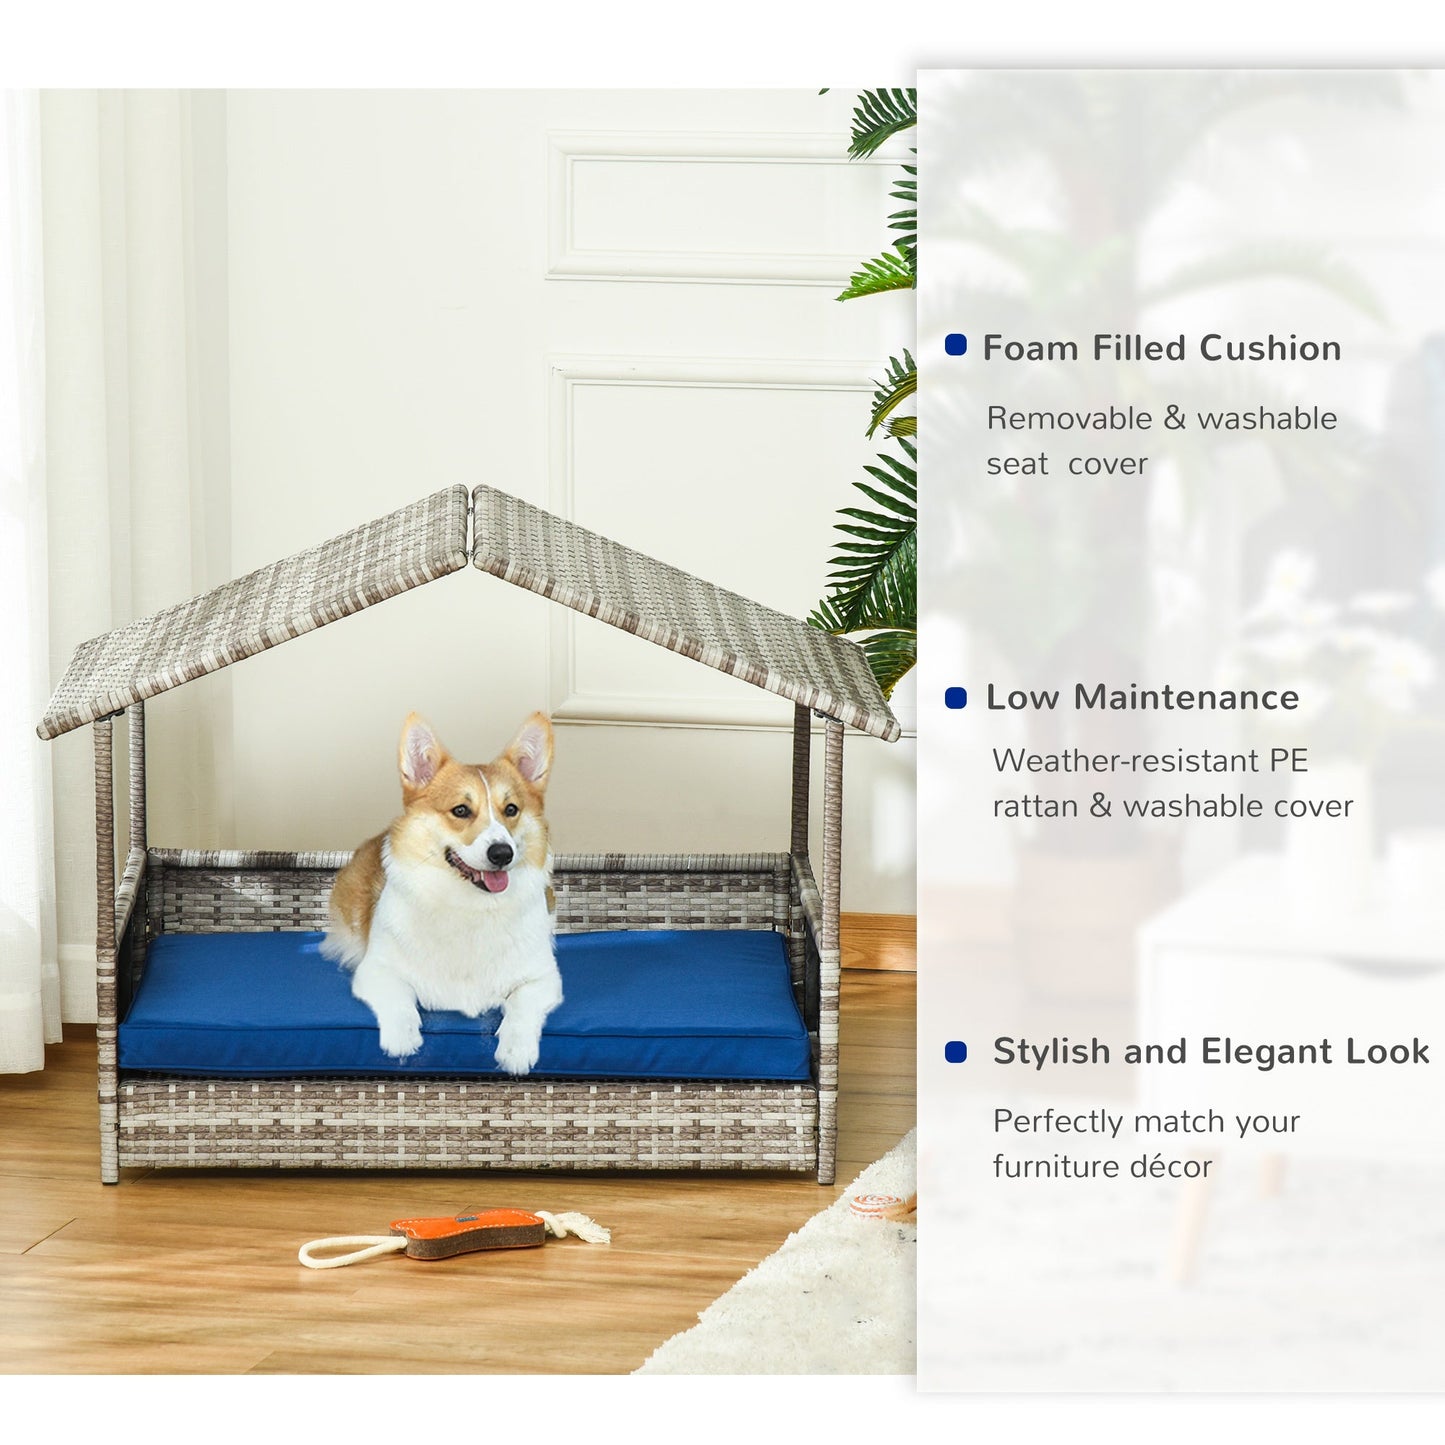 Pet Supplies-Wicker Dog House Elevated Raised Rattan Bed for Indoor/Outdoor with Removable Cushion Lounge, Dark Blue - Outdoor Style Company